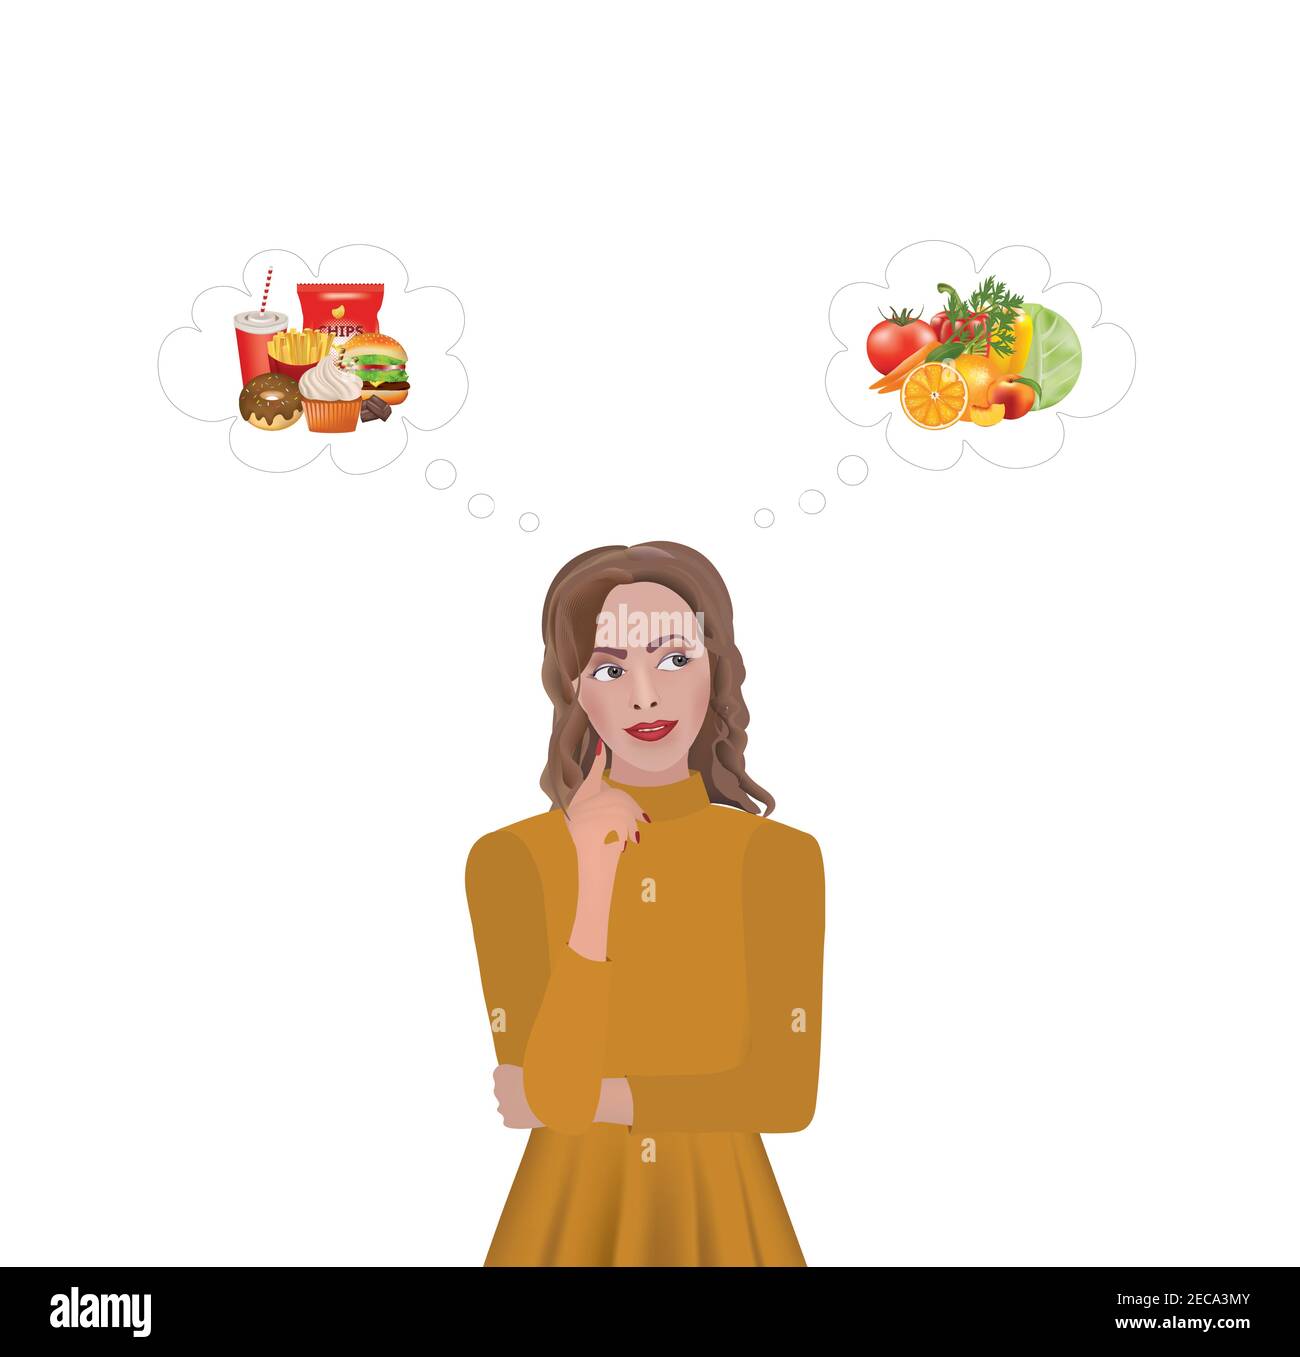 woman thinking about food choice, healthy vs unhealthy food, vector Stock Vector